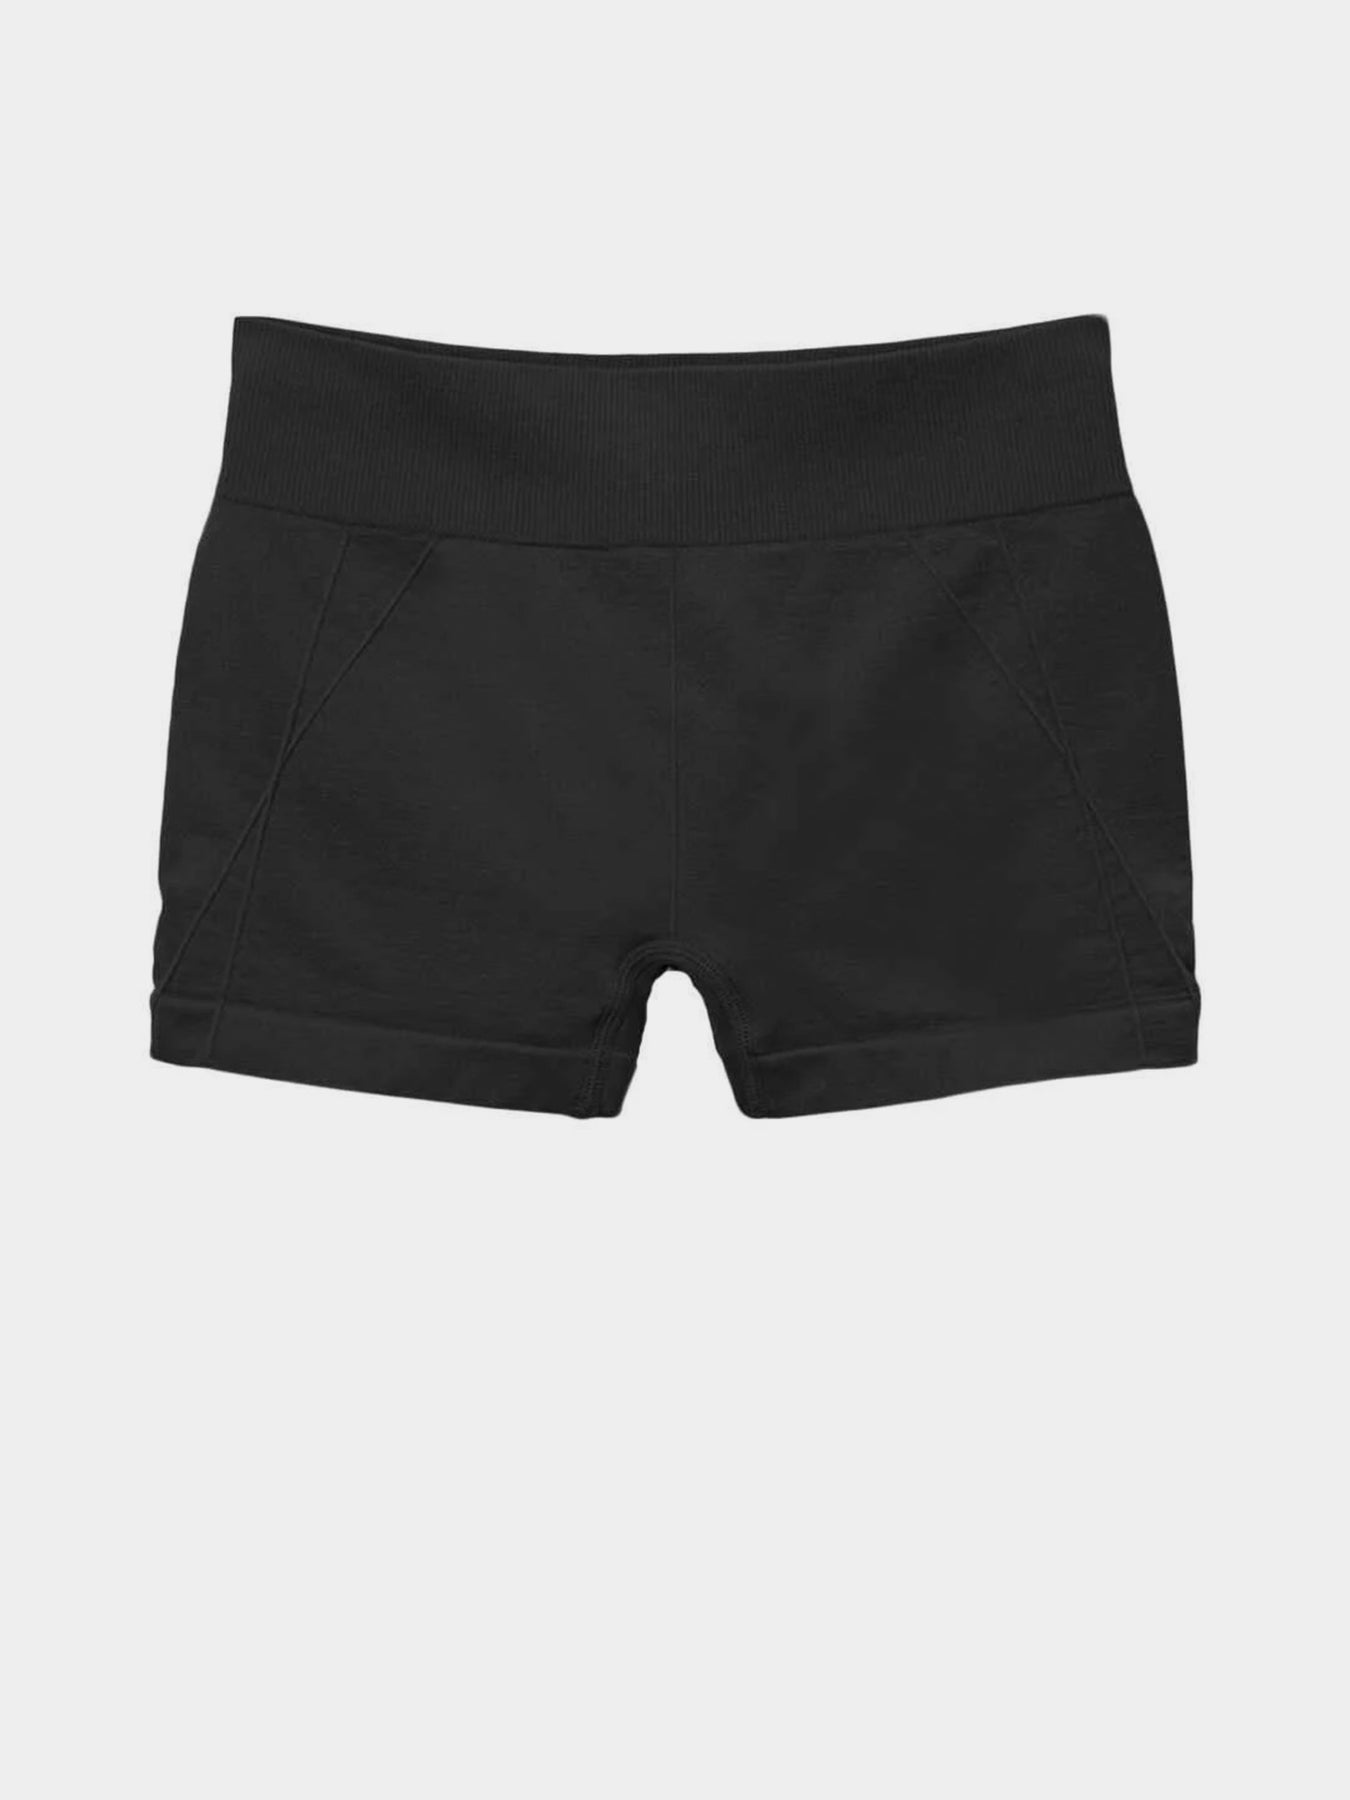 Shop the Seamless Mini Shorts | Girls Active Apparel by Limeapple